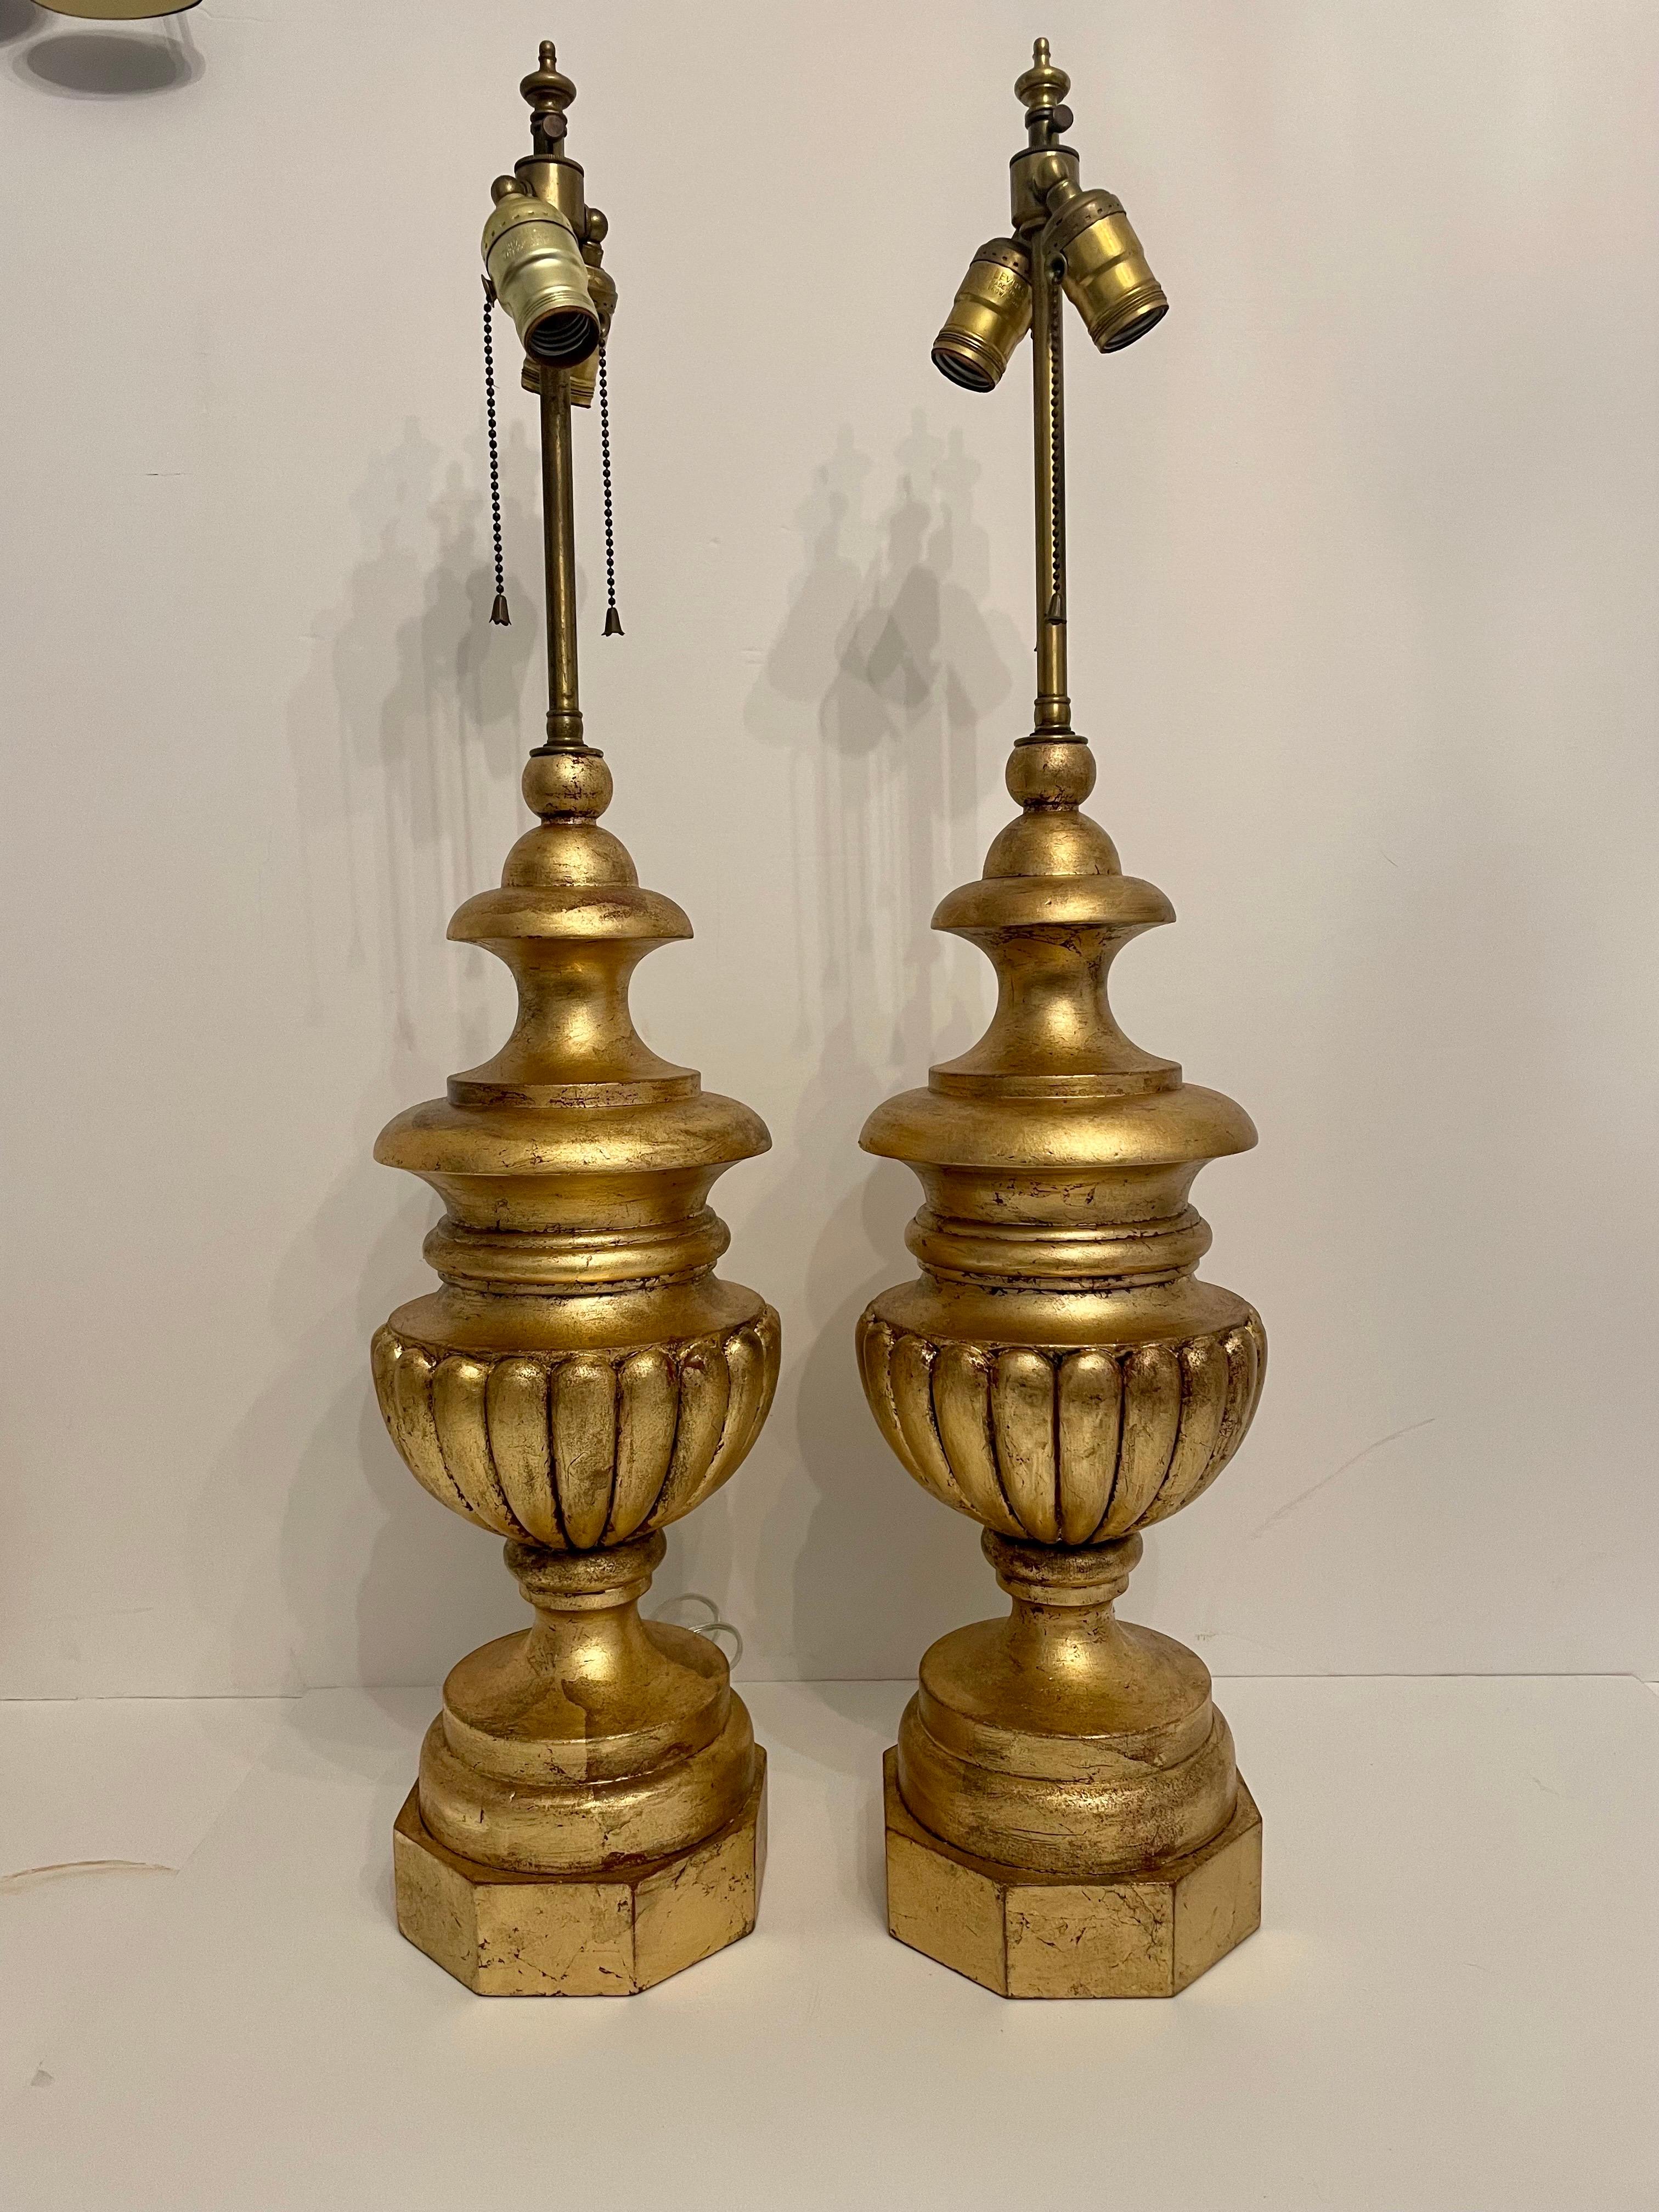 Pair of Hollywood Regency style carved gilt table lamps, circa 1950-1960s. Please note of wear consistent with age including some wear to finish due to use. Shades not included. The lamps measure 31